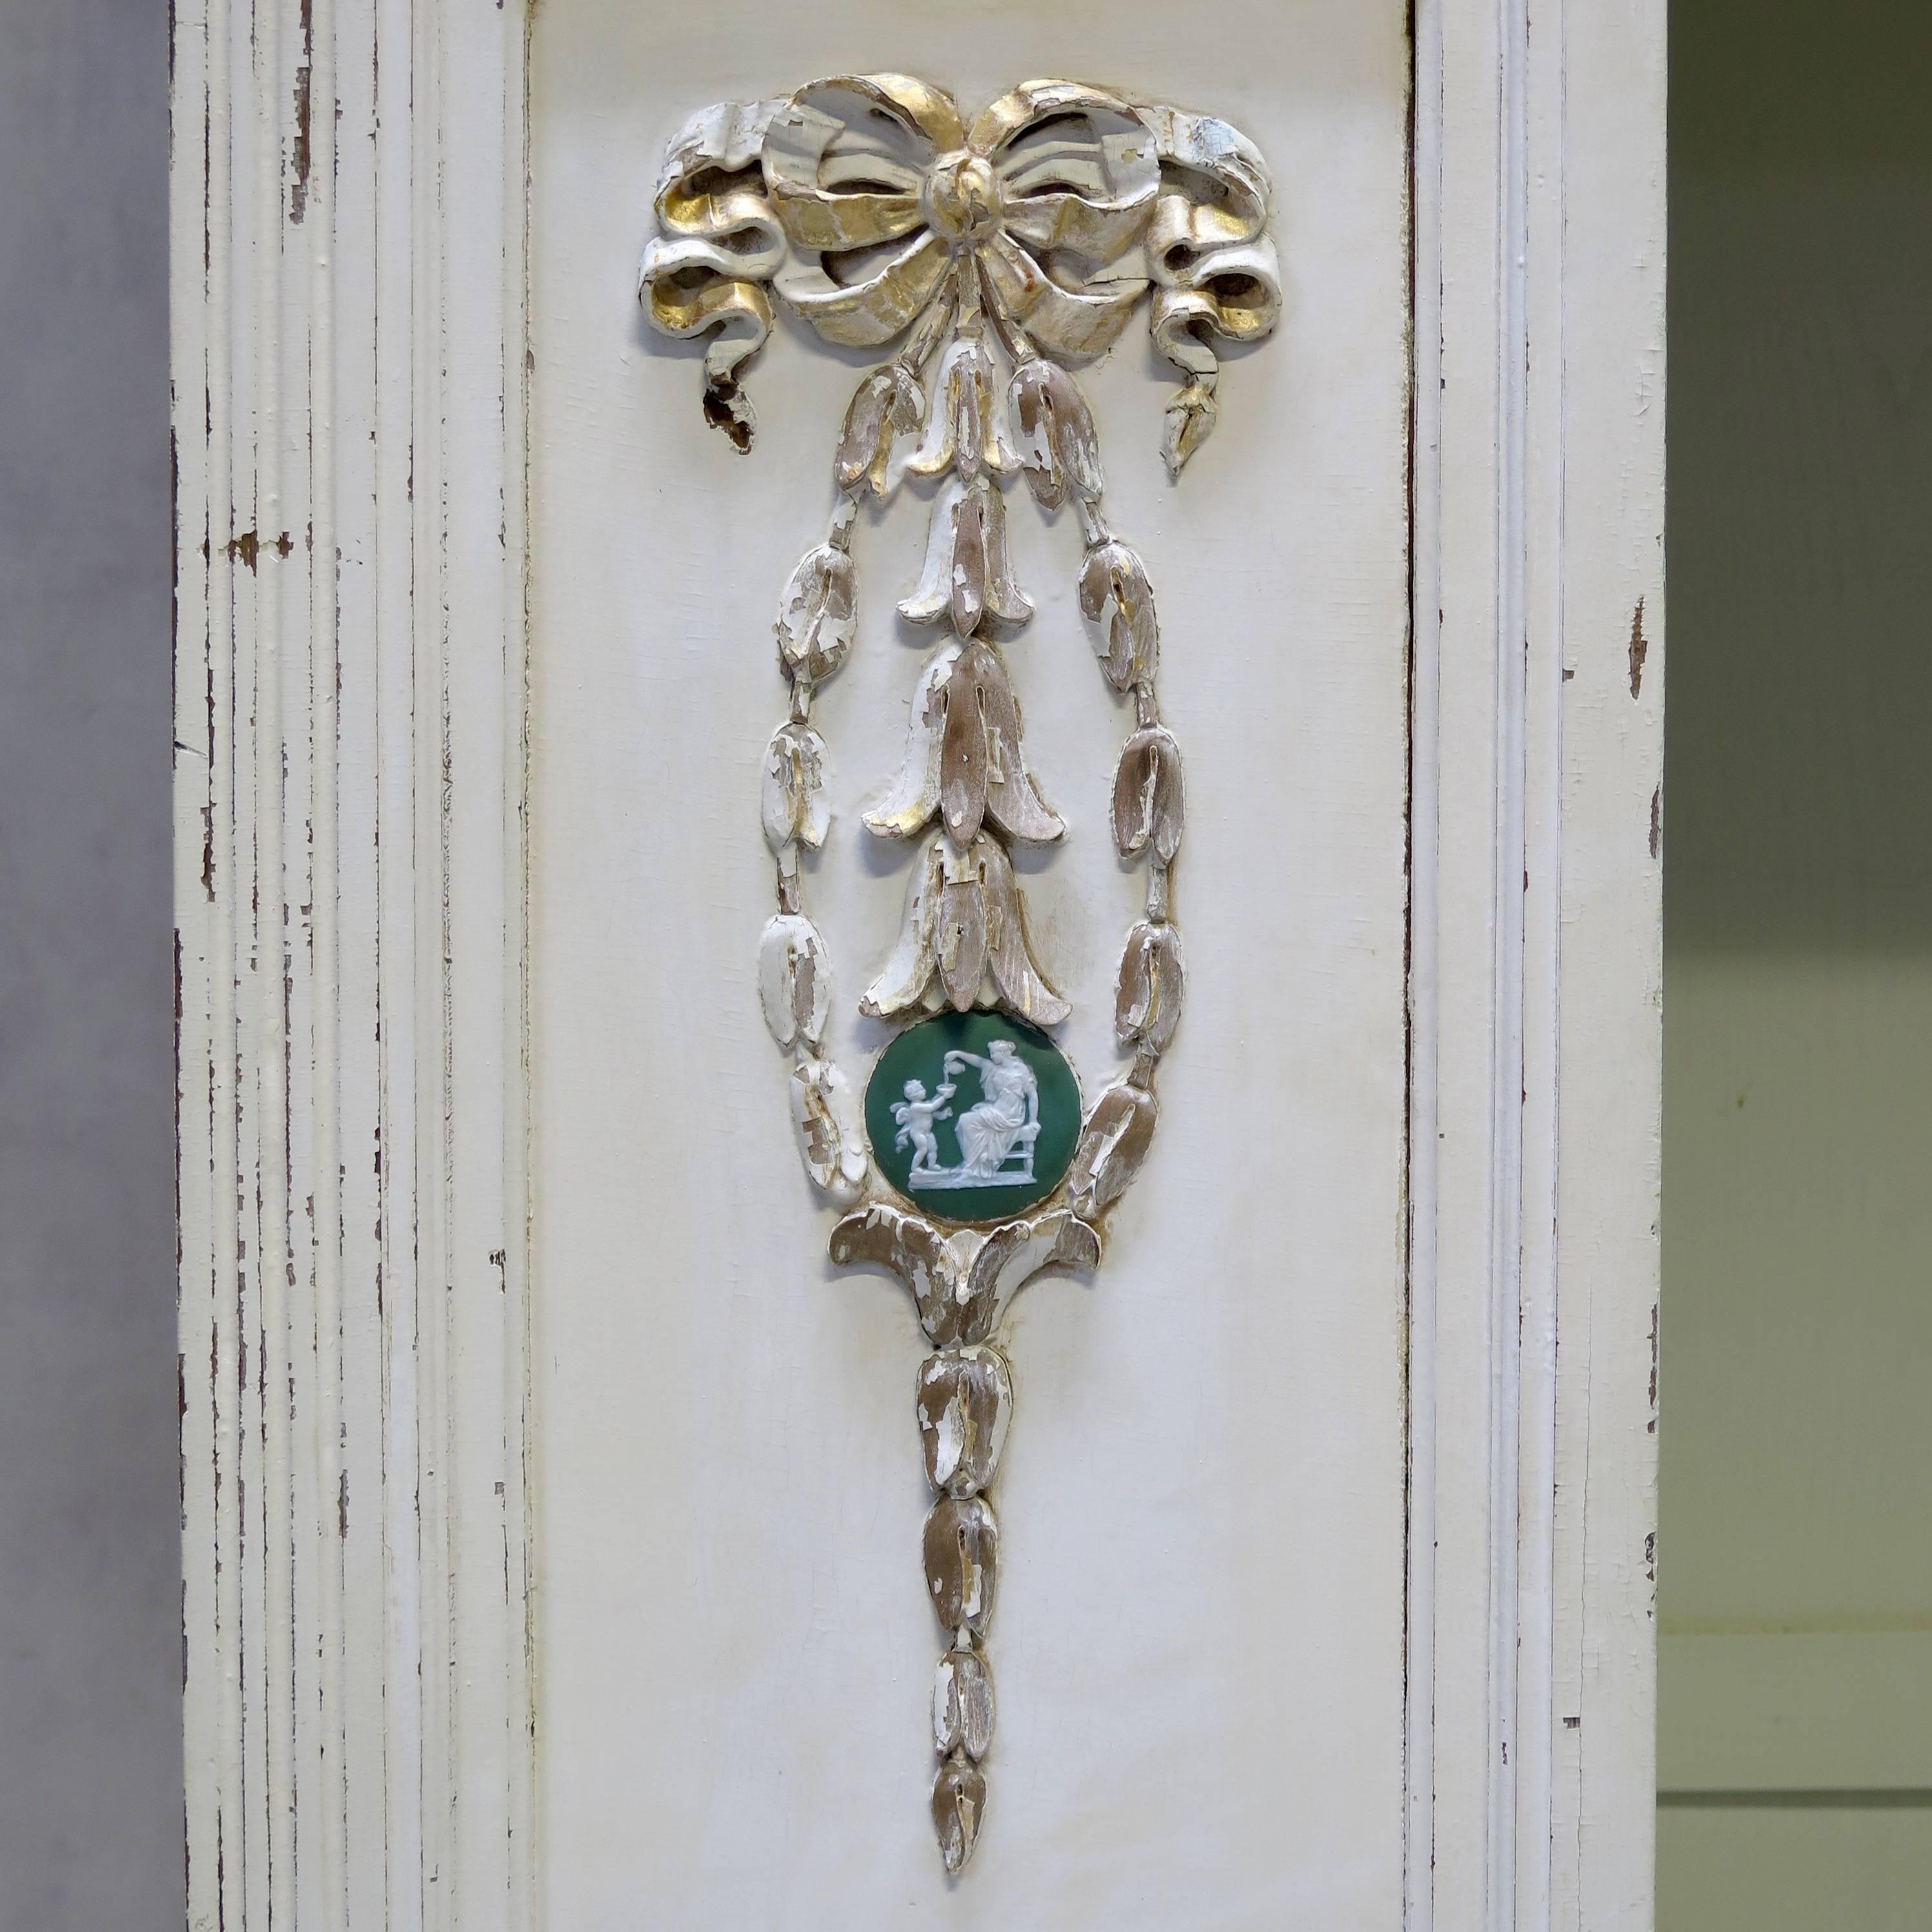 Elegant Louis XVI style wardrobe. The door is fitted with a beveled oval full-length mirror. The sections on either side of the door are decorated with carved bow and ribbon motifs and Wedgwood cameos. At the top is a mauve frosted glass section.